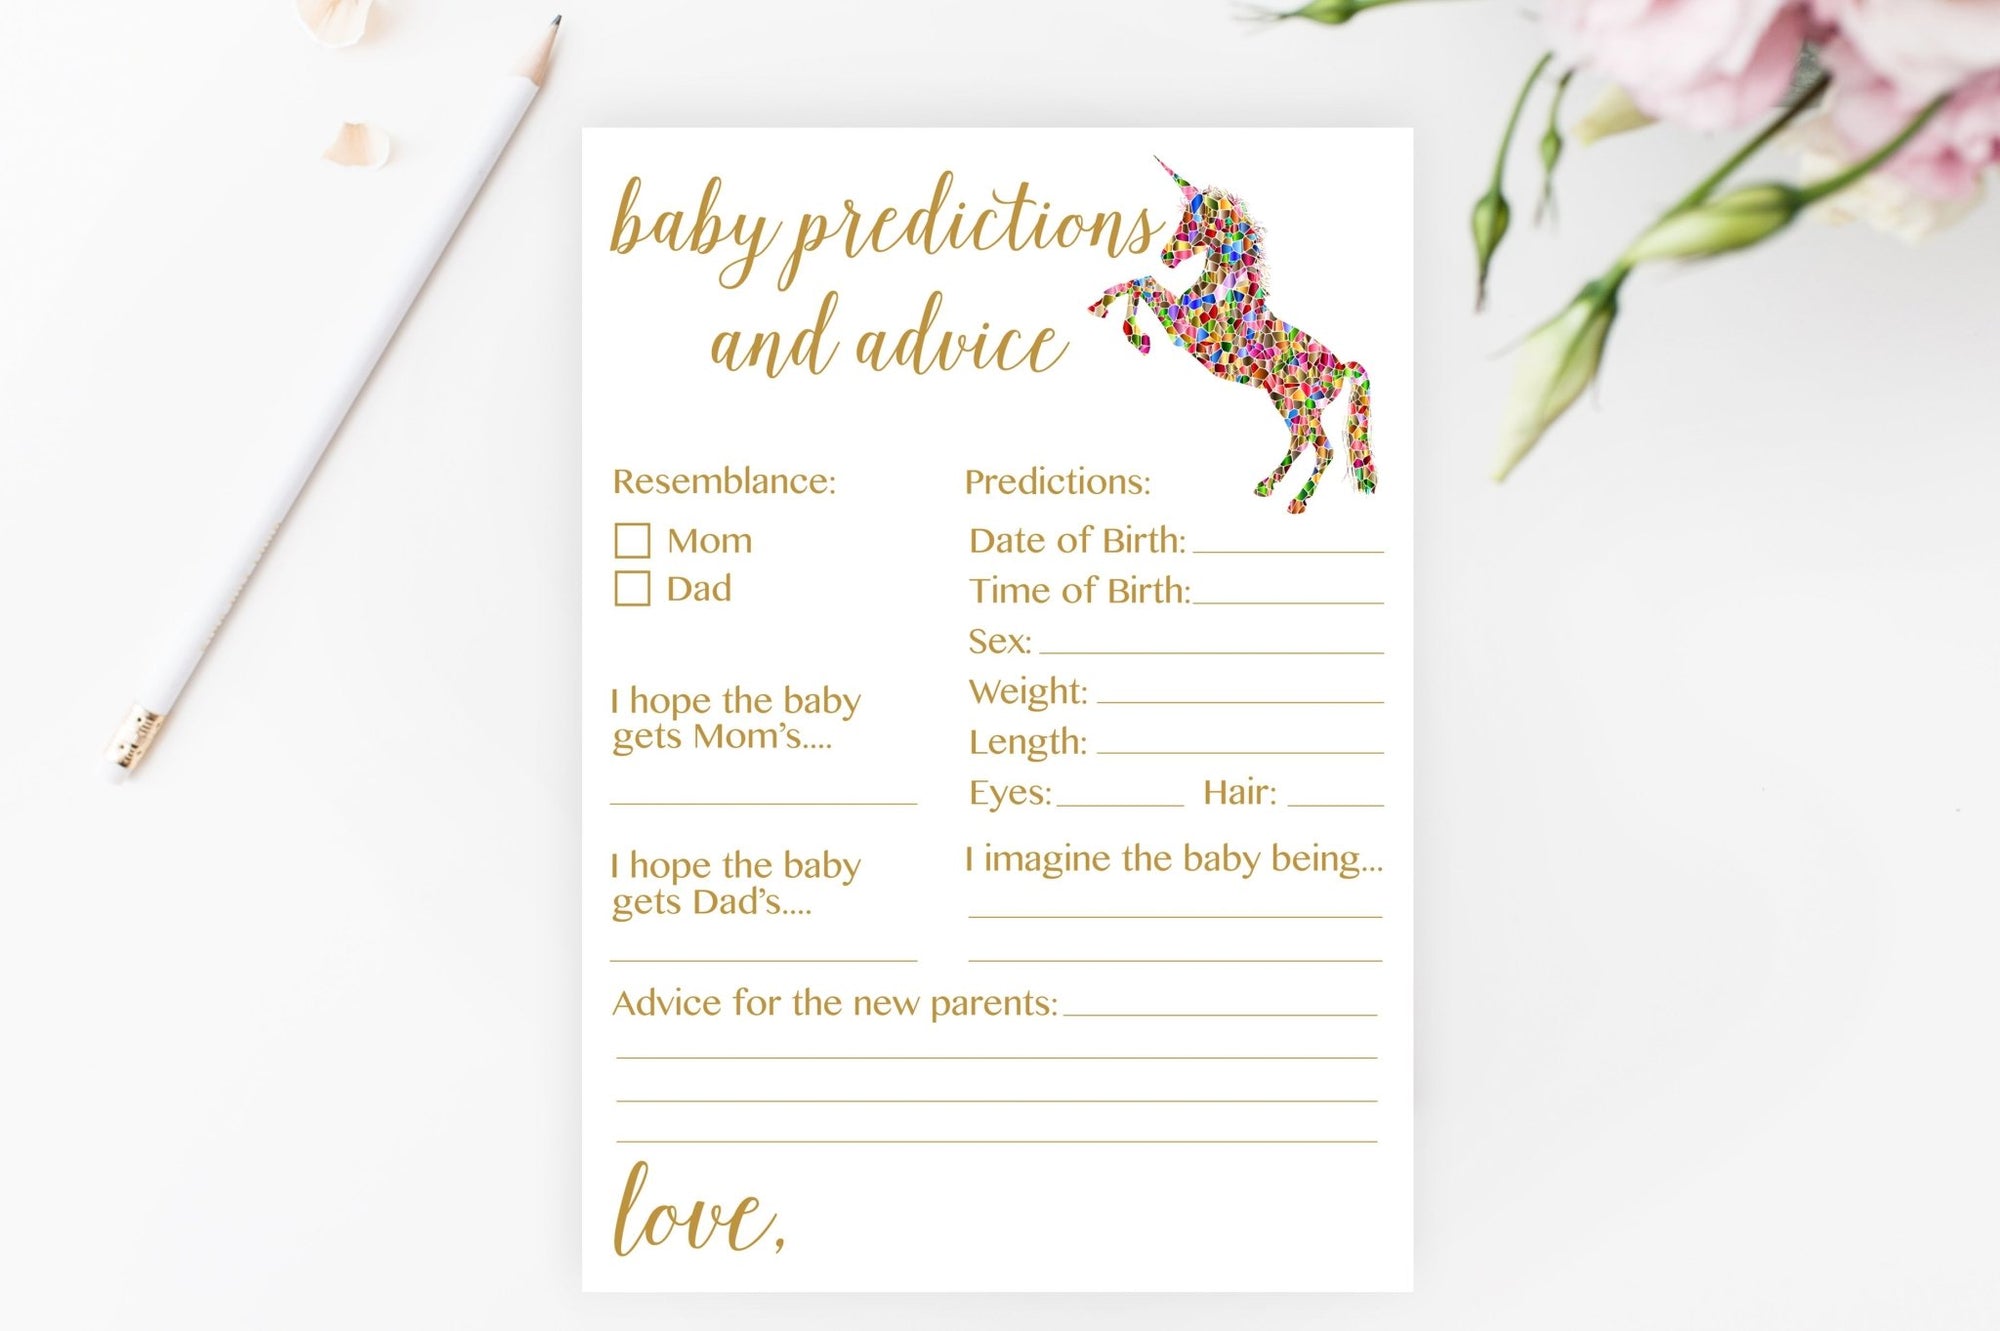 Baby Predictions and Advice - Unicorn Printable - Pretty Collected